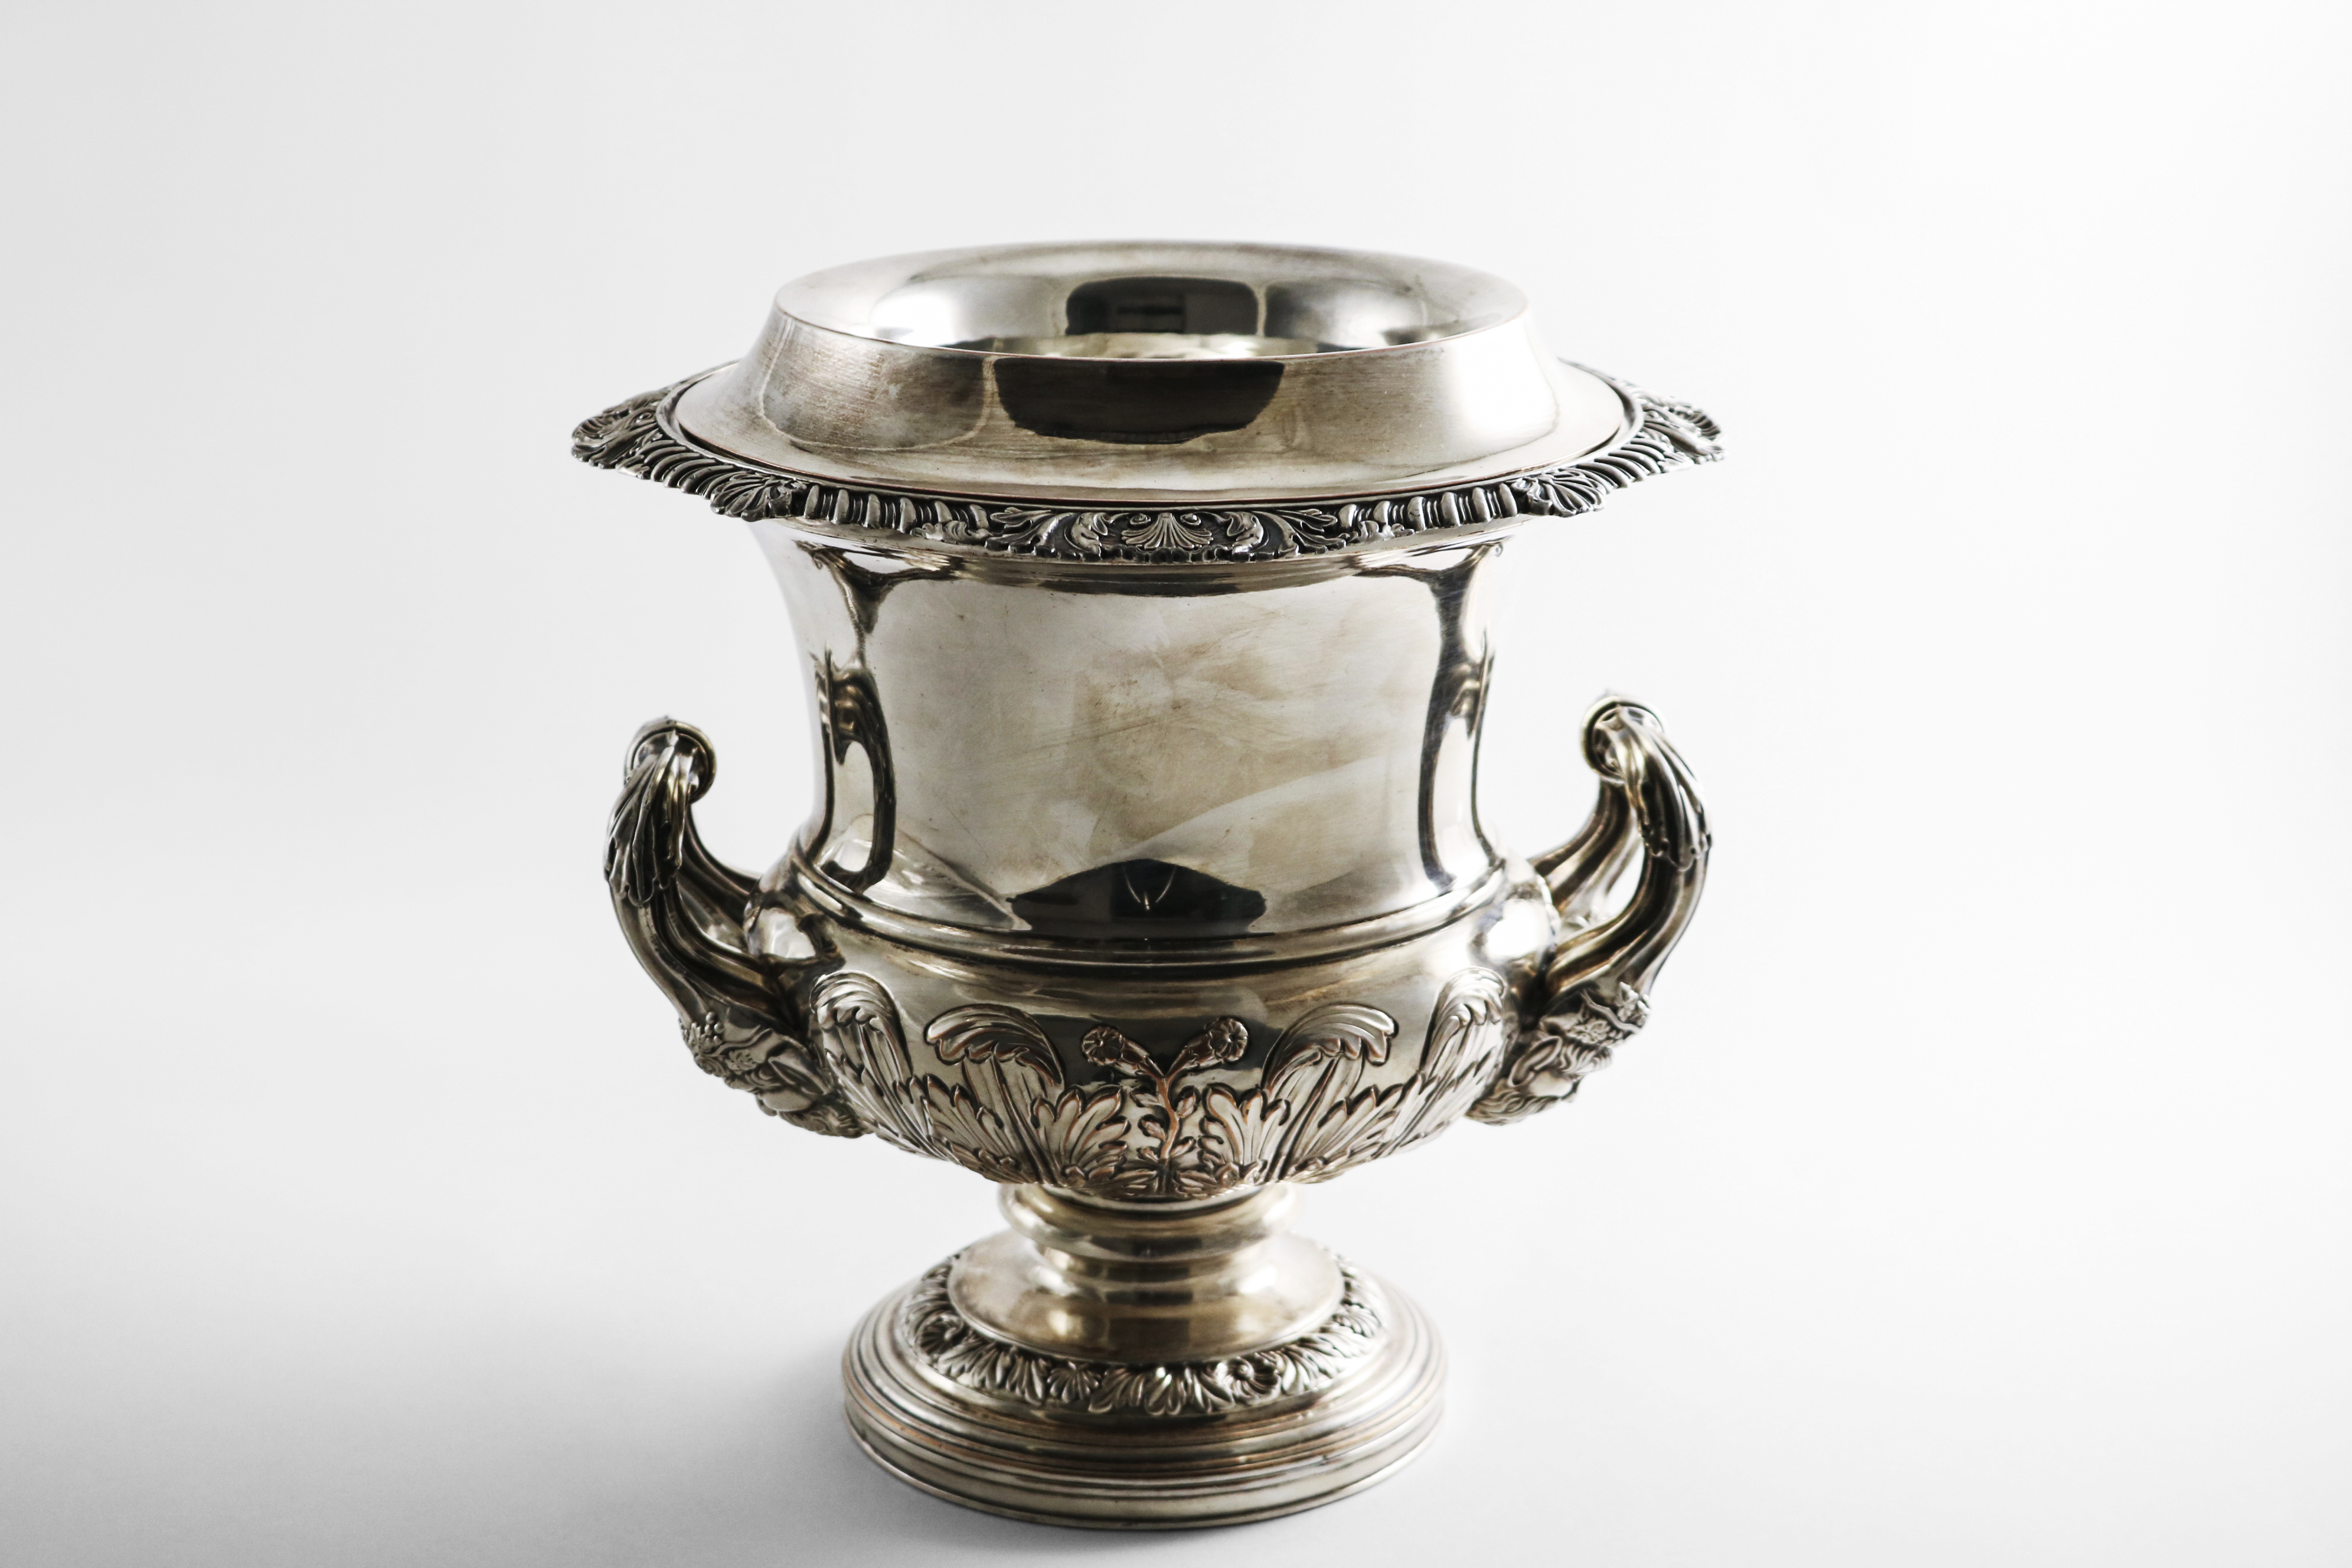 A PAIR OF LATE MIDDLE PERIOD OLD SHEFFIELD PLATED WINE COOLERS of campana form with embossed